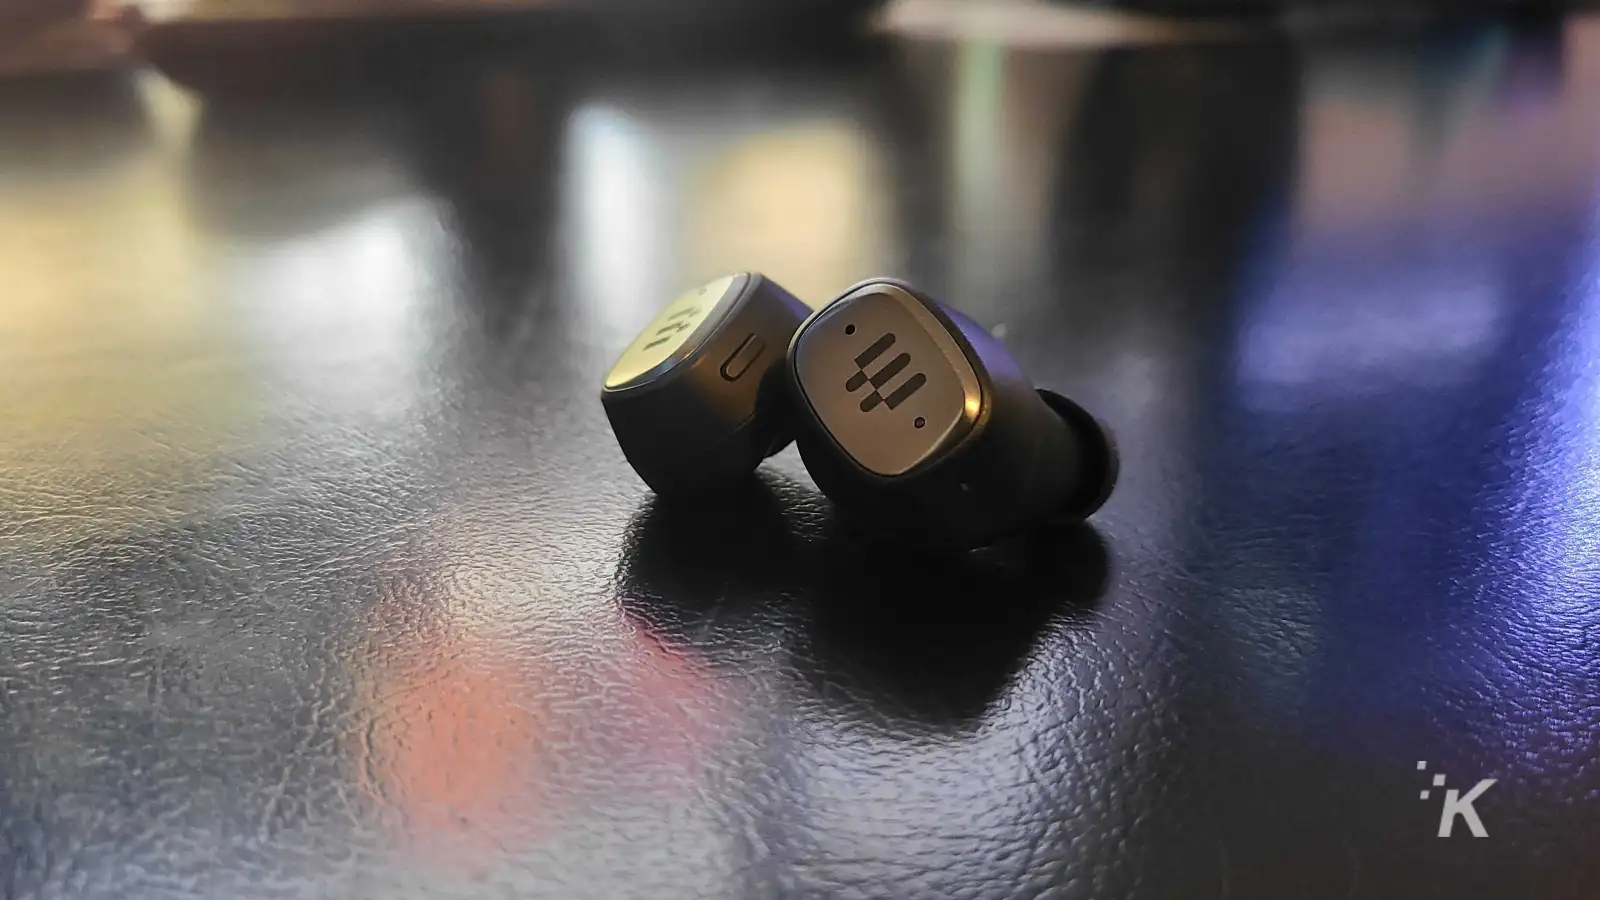 epos gtw 270 earbuds by themselves